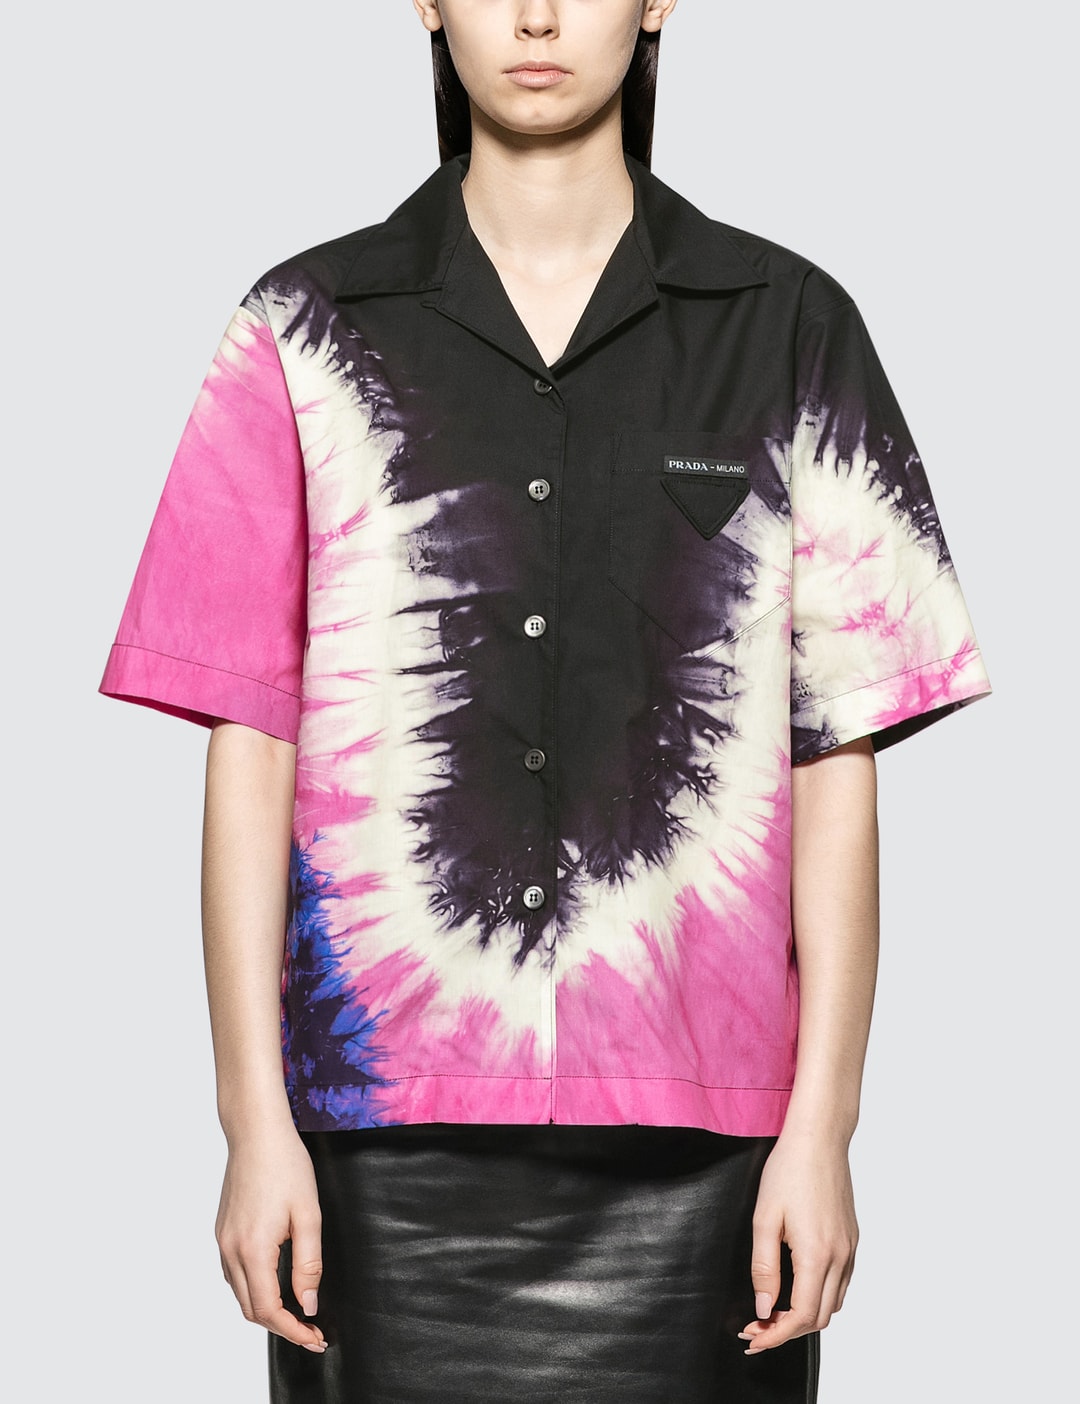 Prada - Tie Dye Print Shirt | HBX - Globally Curated Fashion and Lifestyle  by Hypebeast